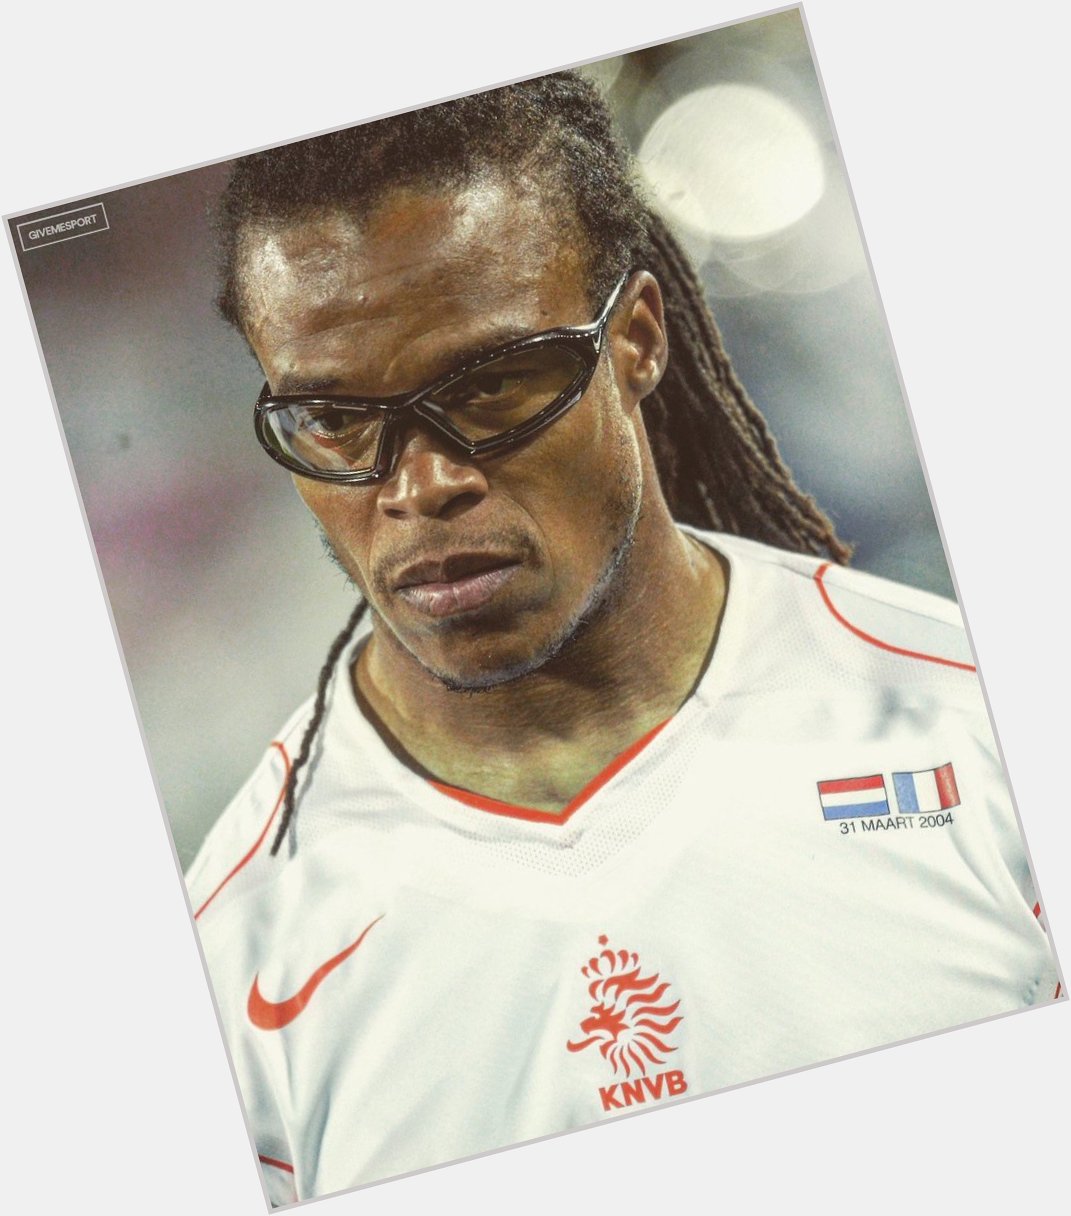 Happy birthday, Edgar Davids! One of the most recognisable players ever. A legend in his own right. 